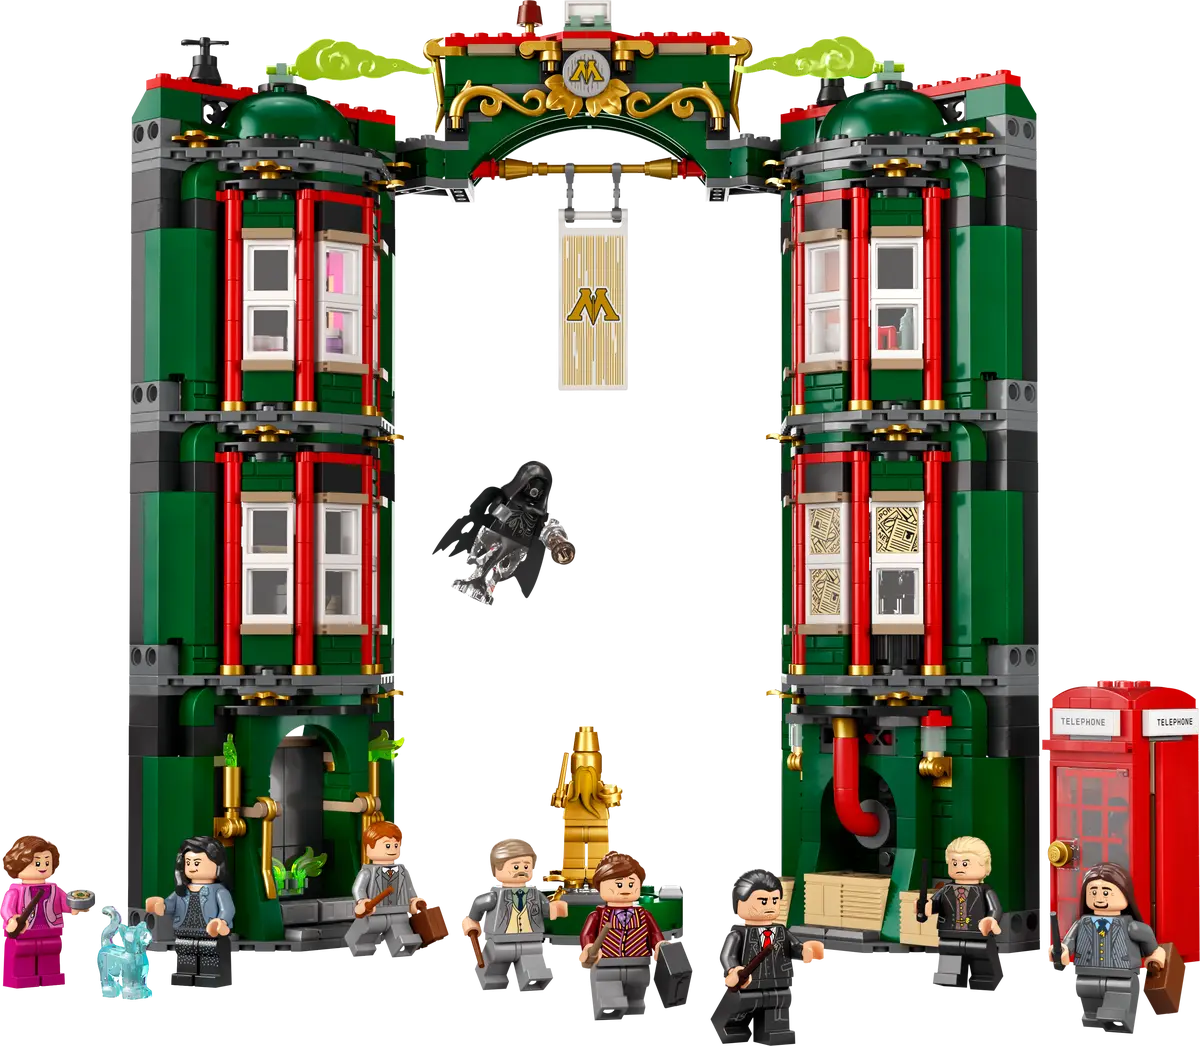 Lego 76403 Harry Potter The Ministry of Magic Building Toy (990 pcs)